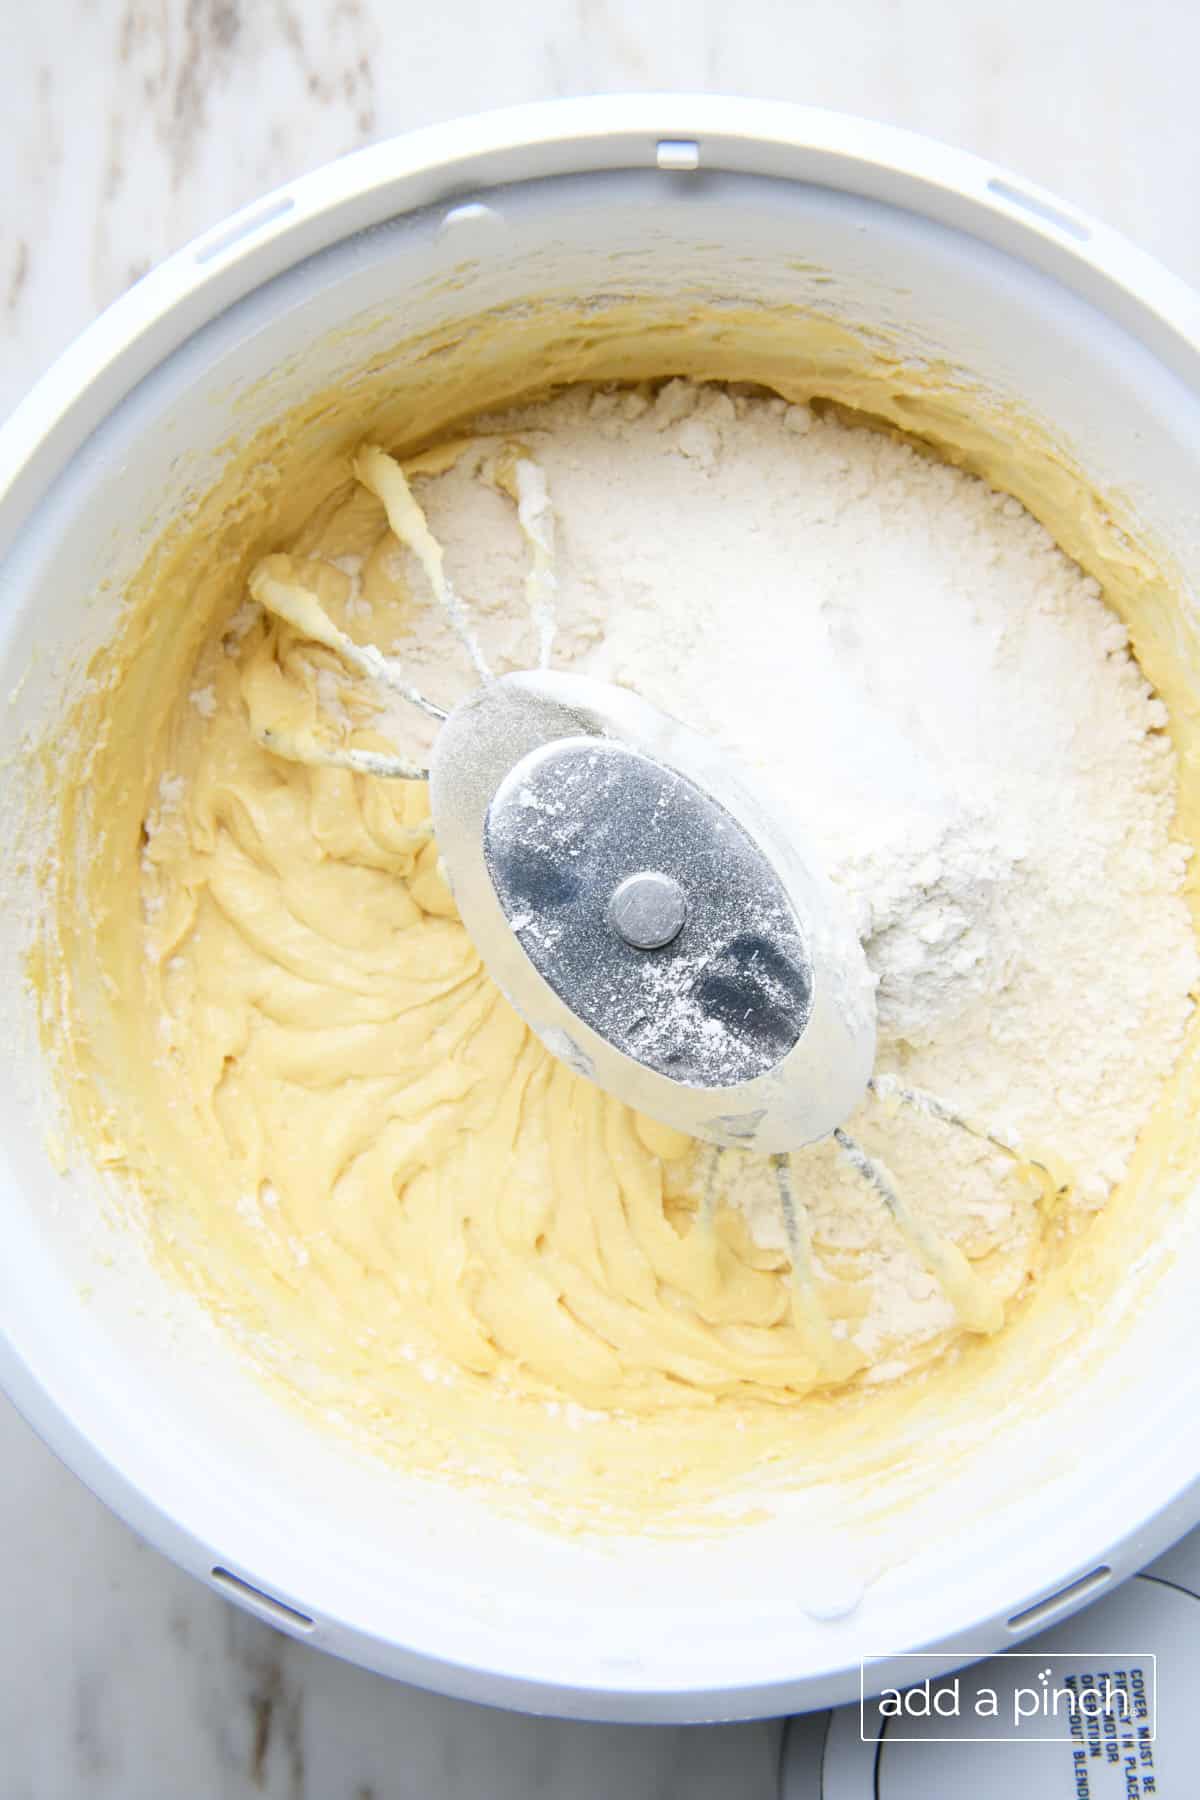 Flour is slowly added to other mixed lemon pound cake ingredients in the mixing bowl of a stand mixer.